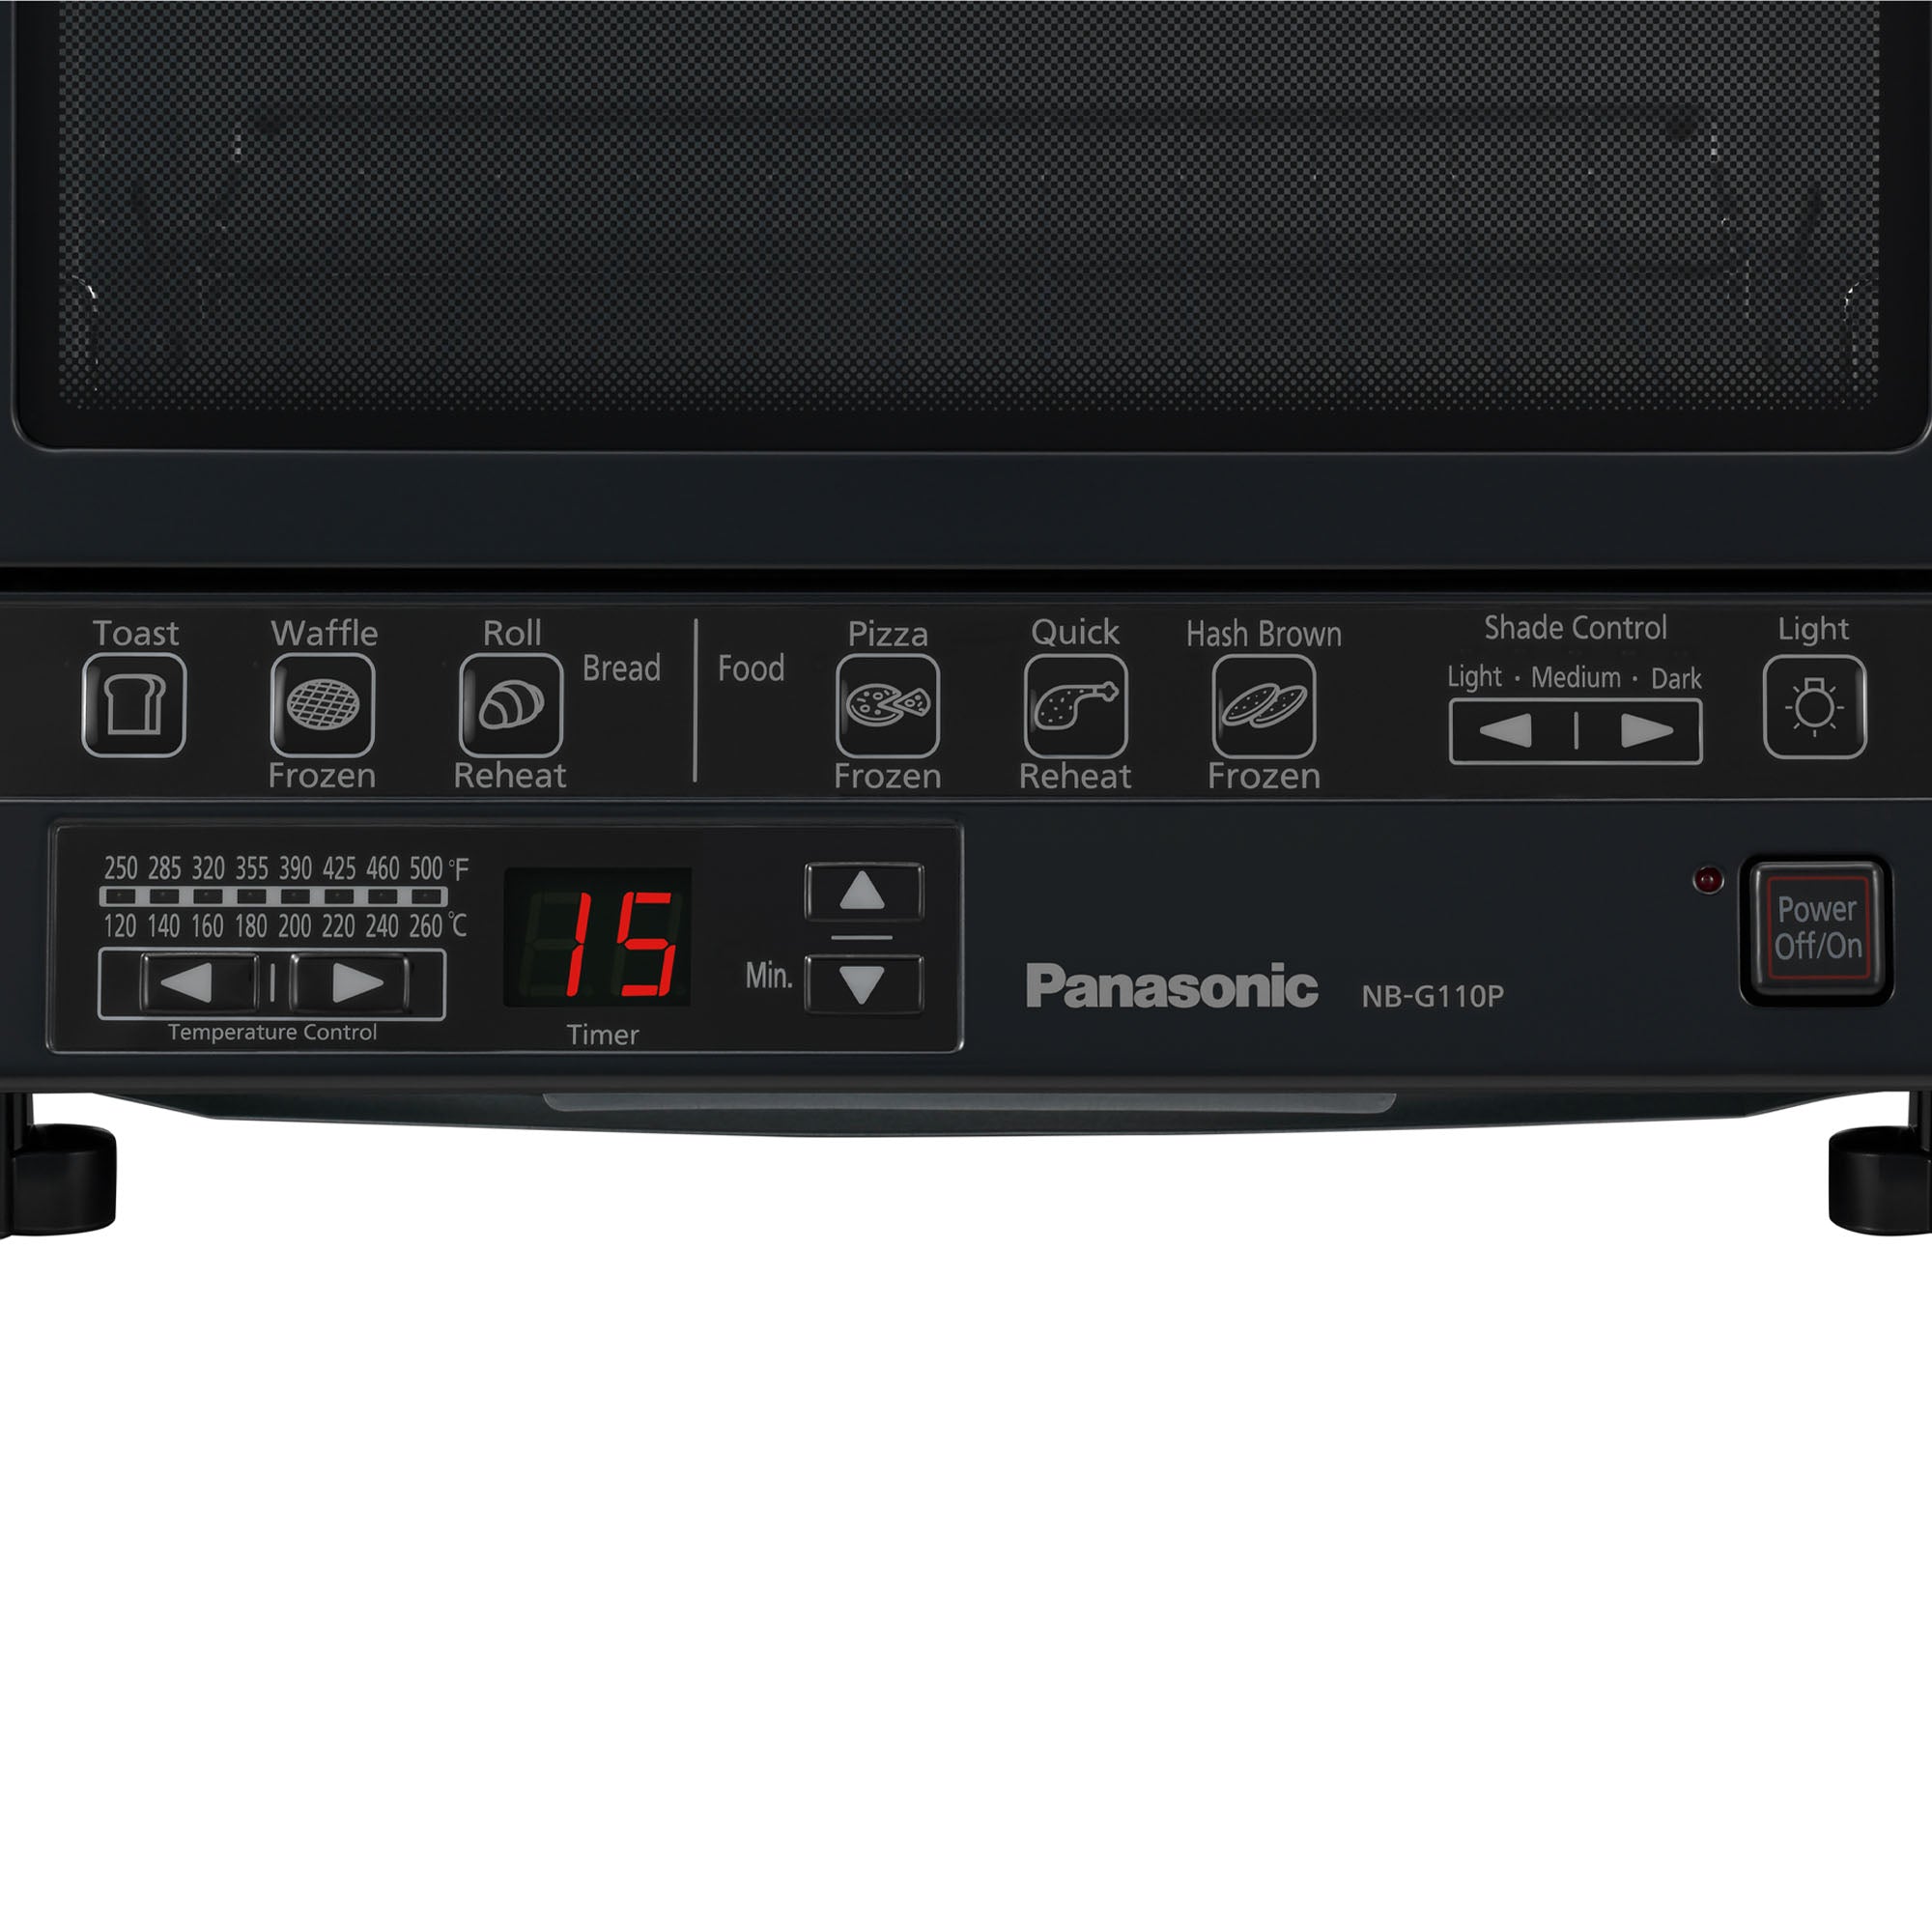 Best Buy: Panasonic FlashXpress 4-Slice Toaster Oven Stealth Gray NB-G110P